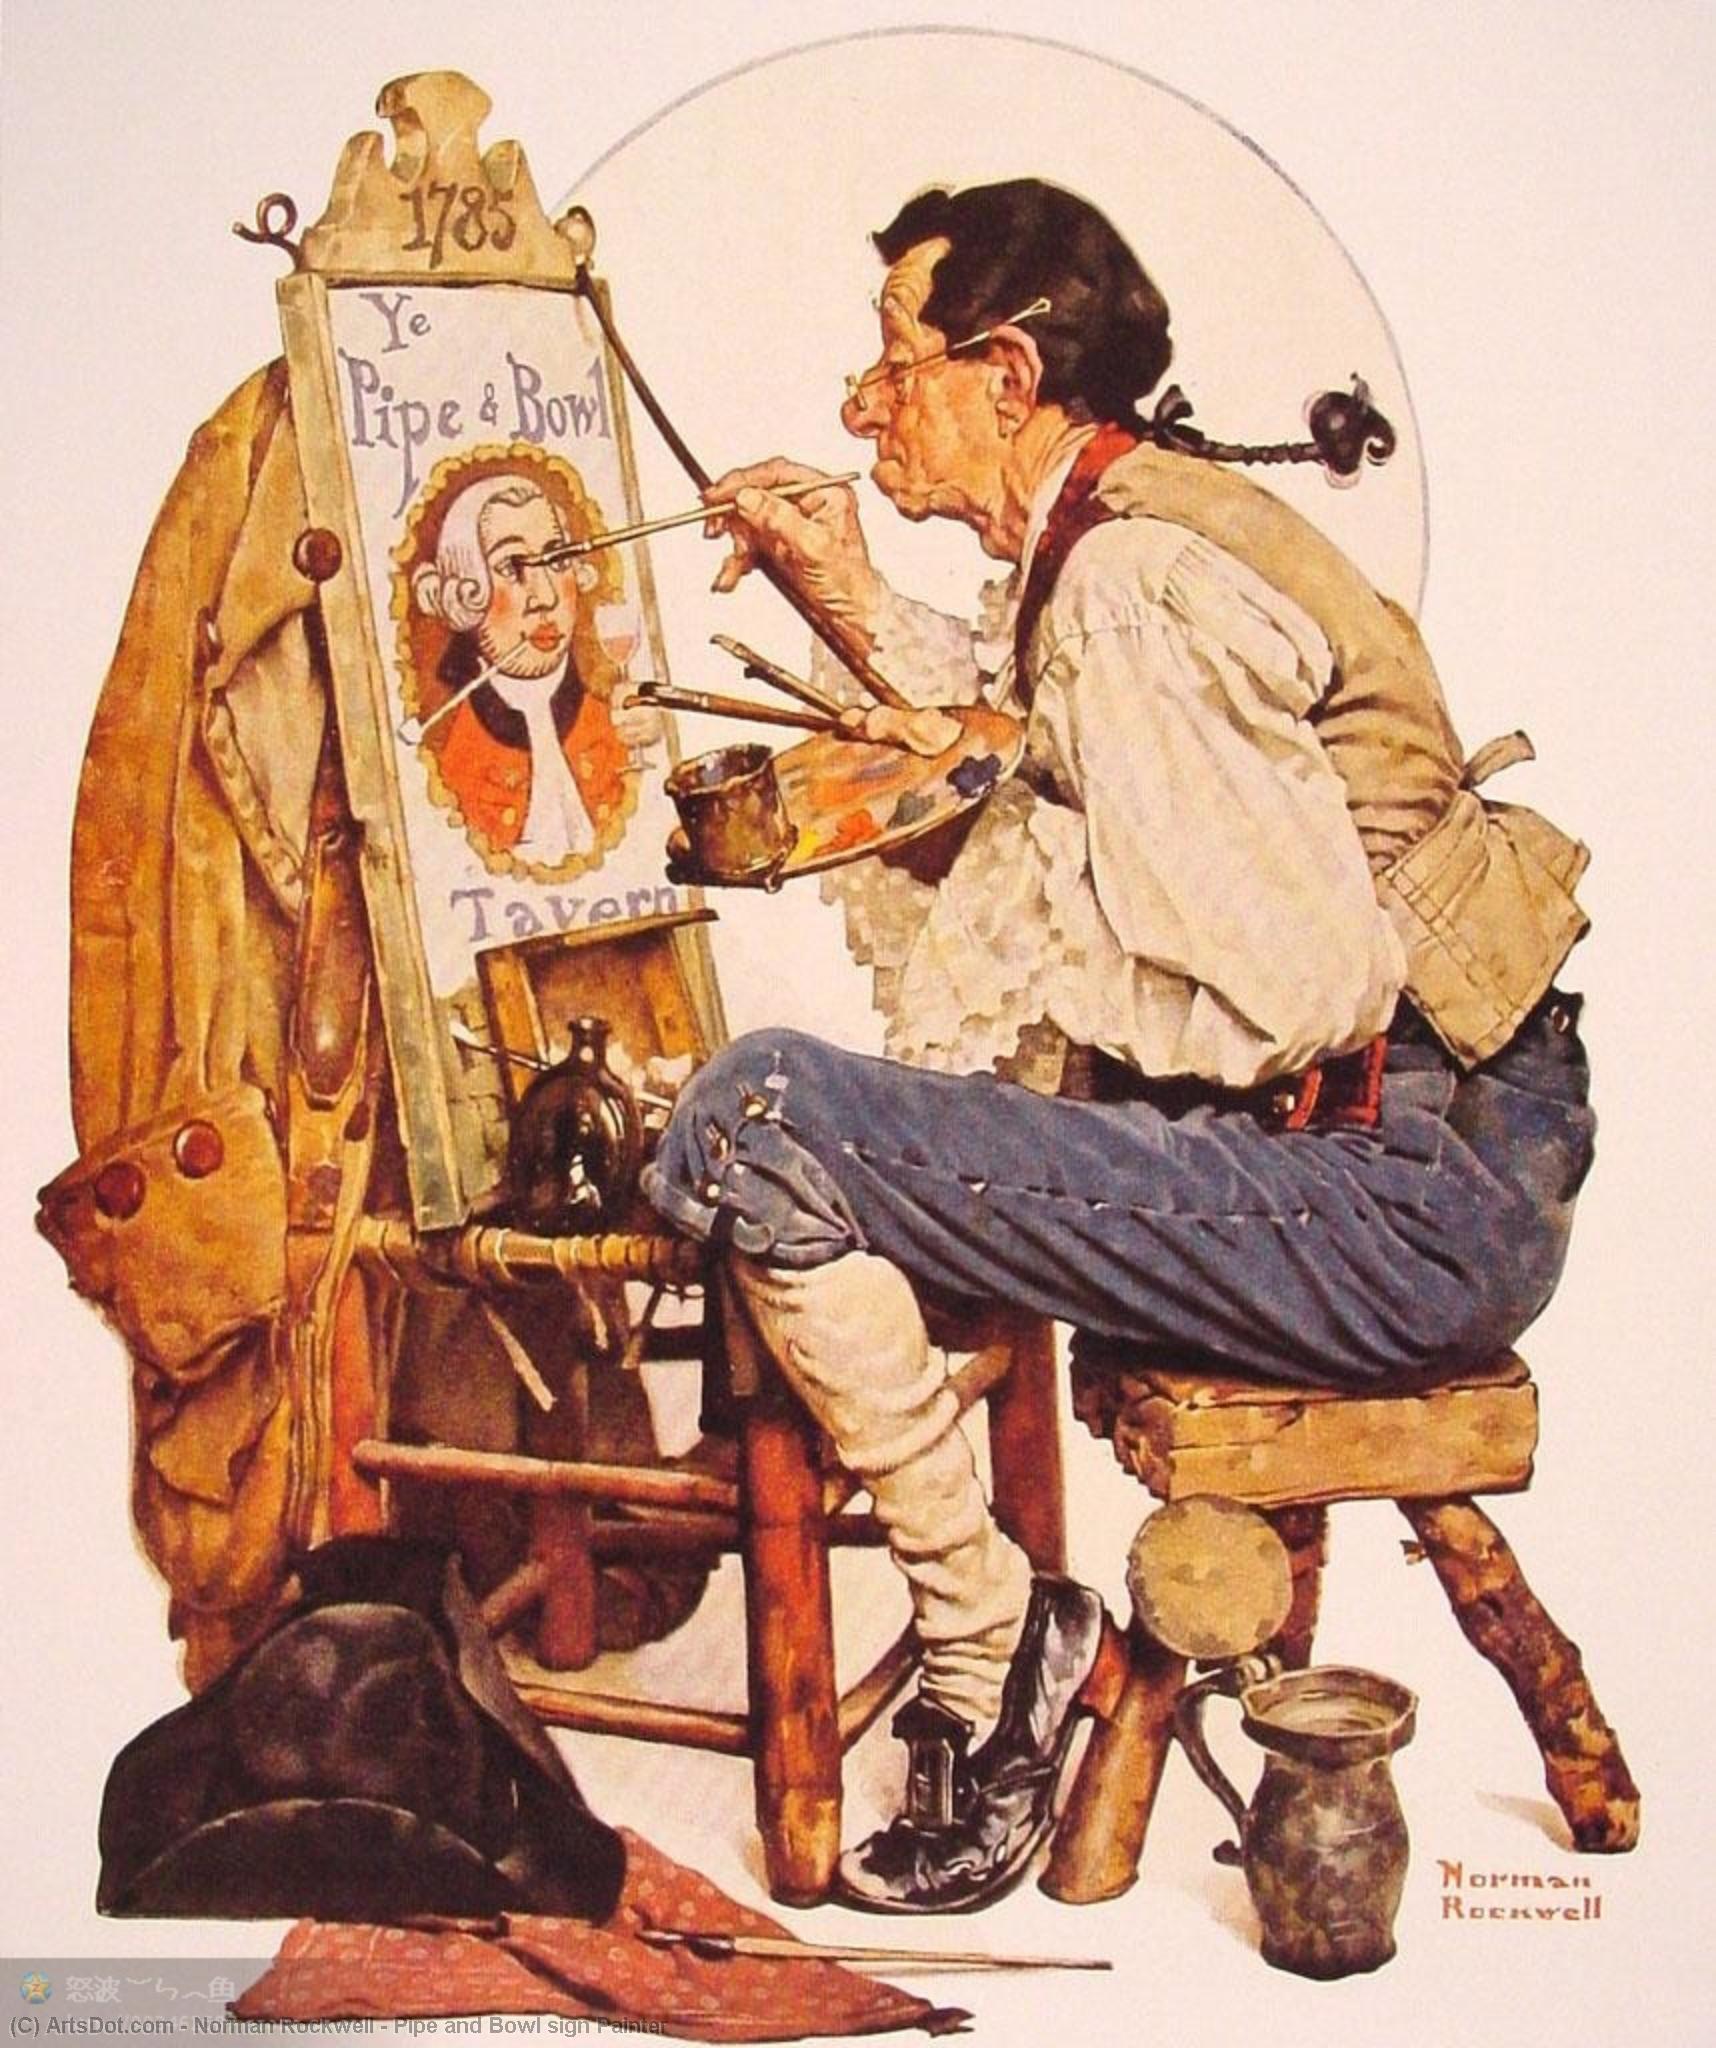 WikiOO.org - Encyclopedia of Fine Arts - Festés, Grafika Norman Rockwell - Pipe and Bowl sign Painter